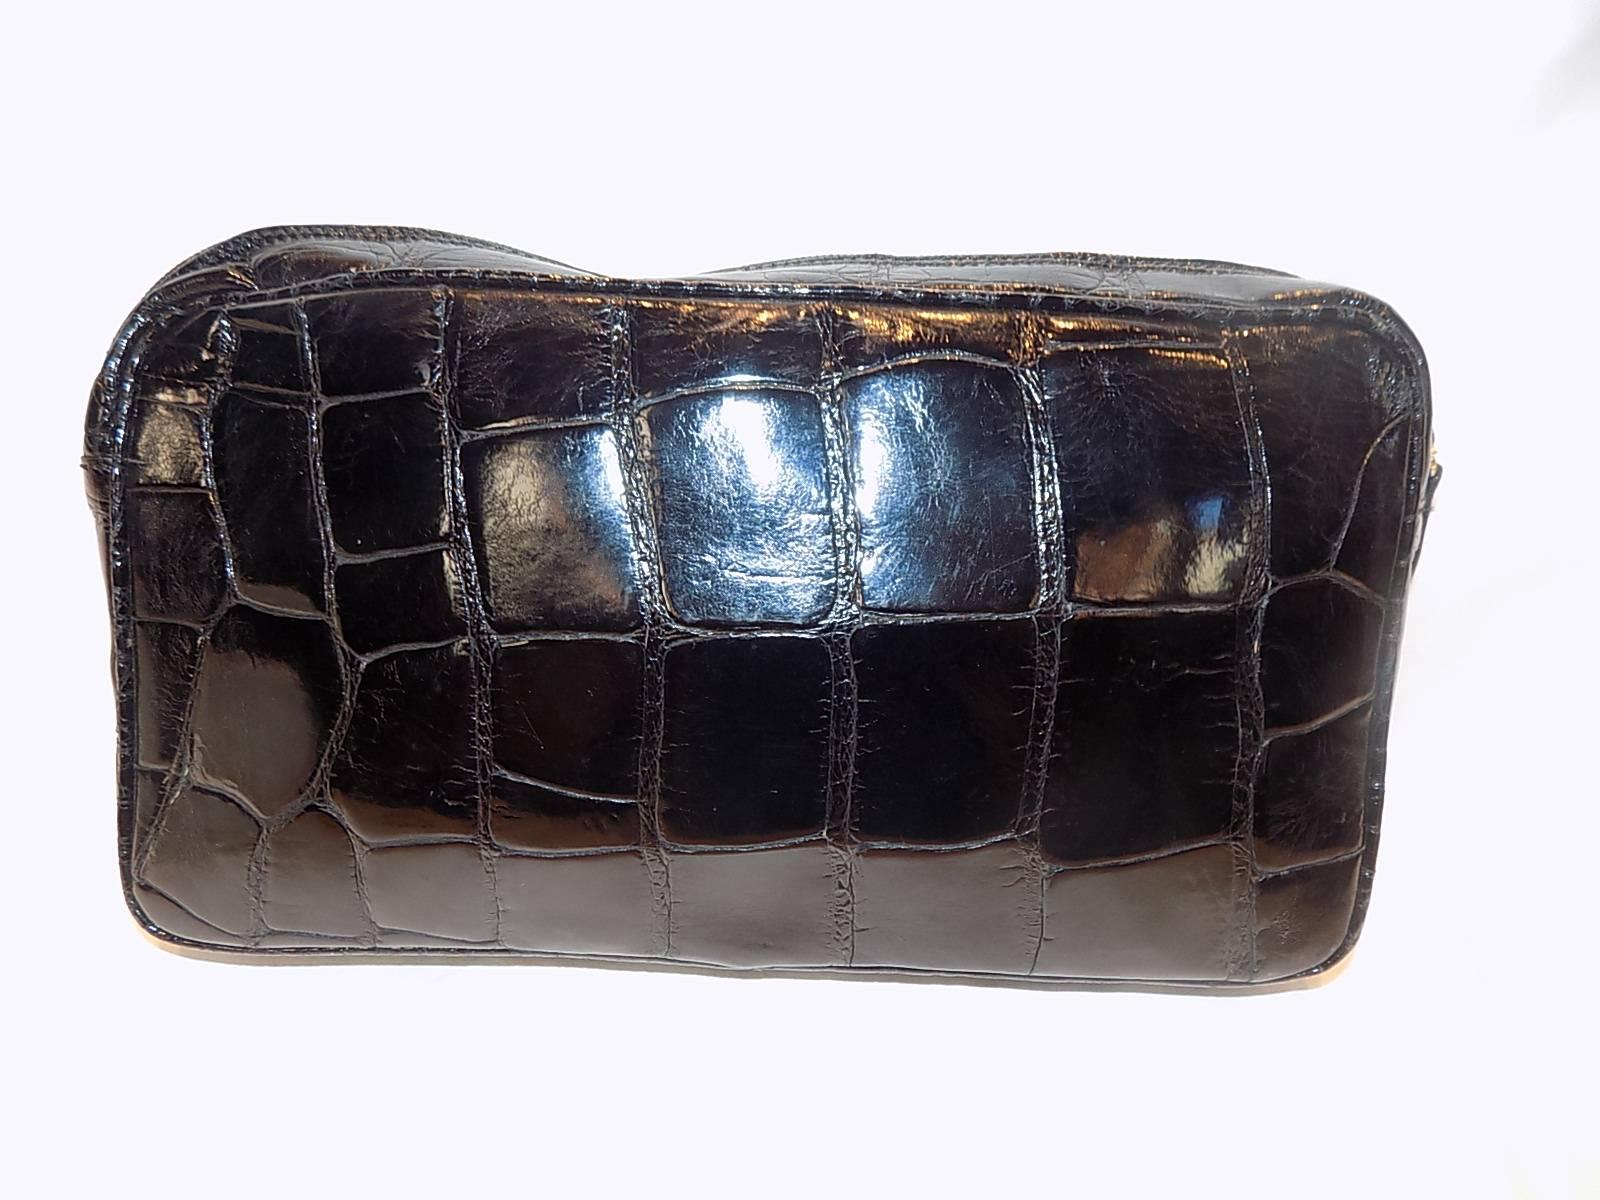 Fabulous Mauro Governa crocodile large black clutch bag Mens accessories bag . Italian craftsmanship. Brown suede lining. Zip top closure. One outer pocket. One inside zip closure pocket. . Measures 13